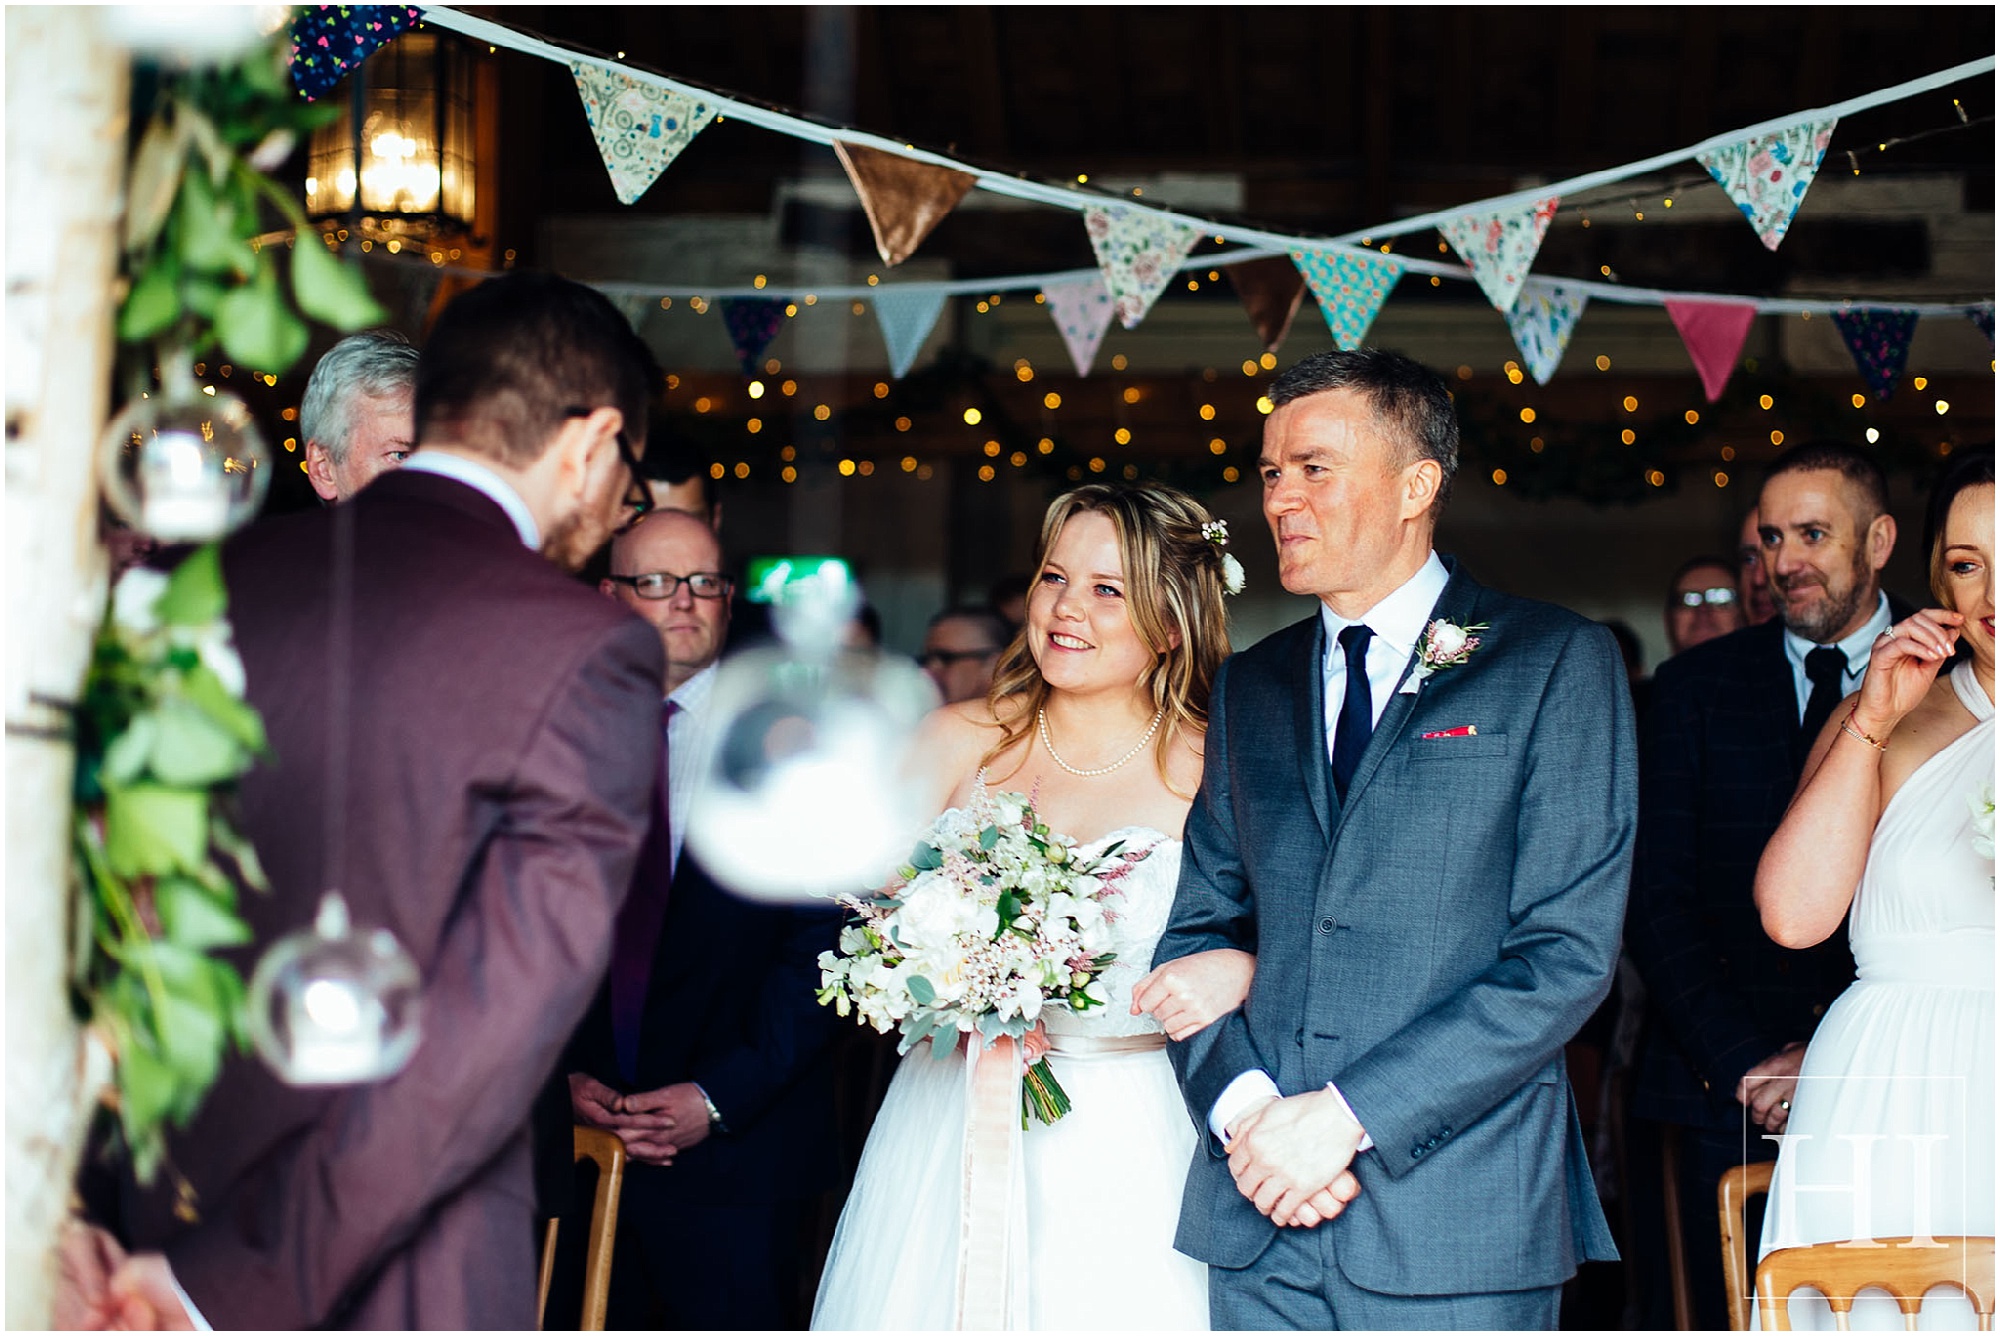 East Riddlesden Hall Wedding Photography Hamish Irvine Yorkshire Leeds Photographer Dom Caroline Nomad Catering National Trust Stems  Design Wild Geese Rapport Hair Beauty Hollins Hall 